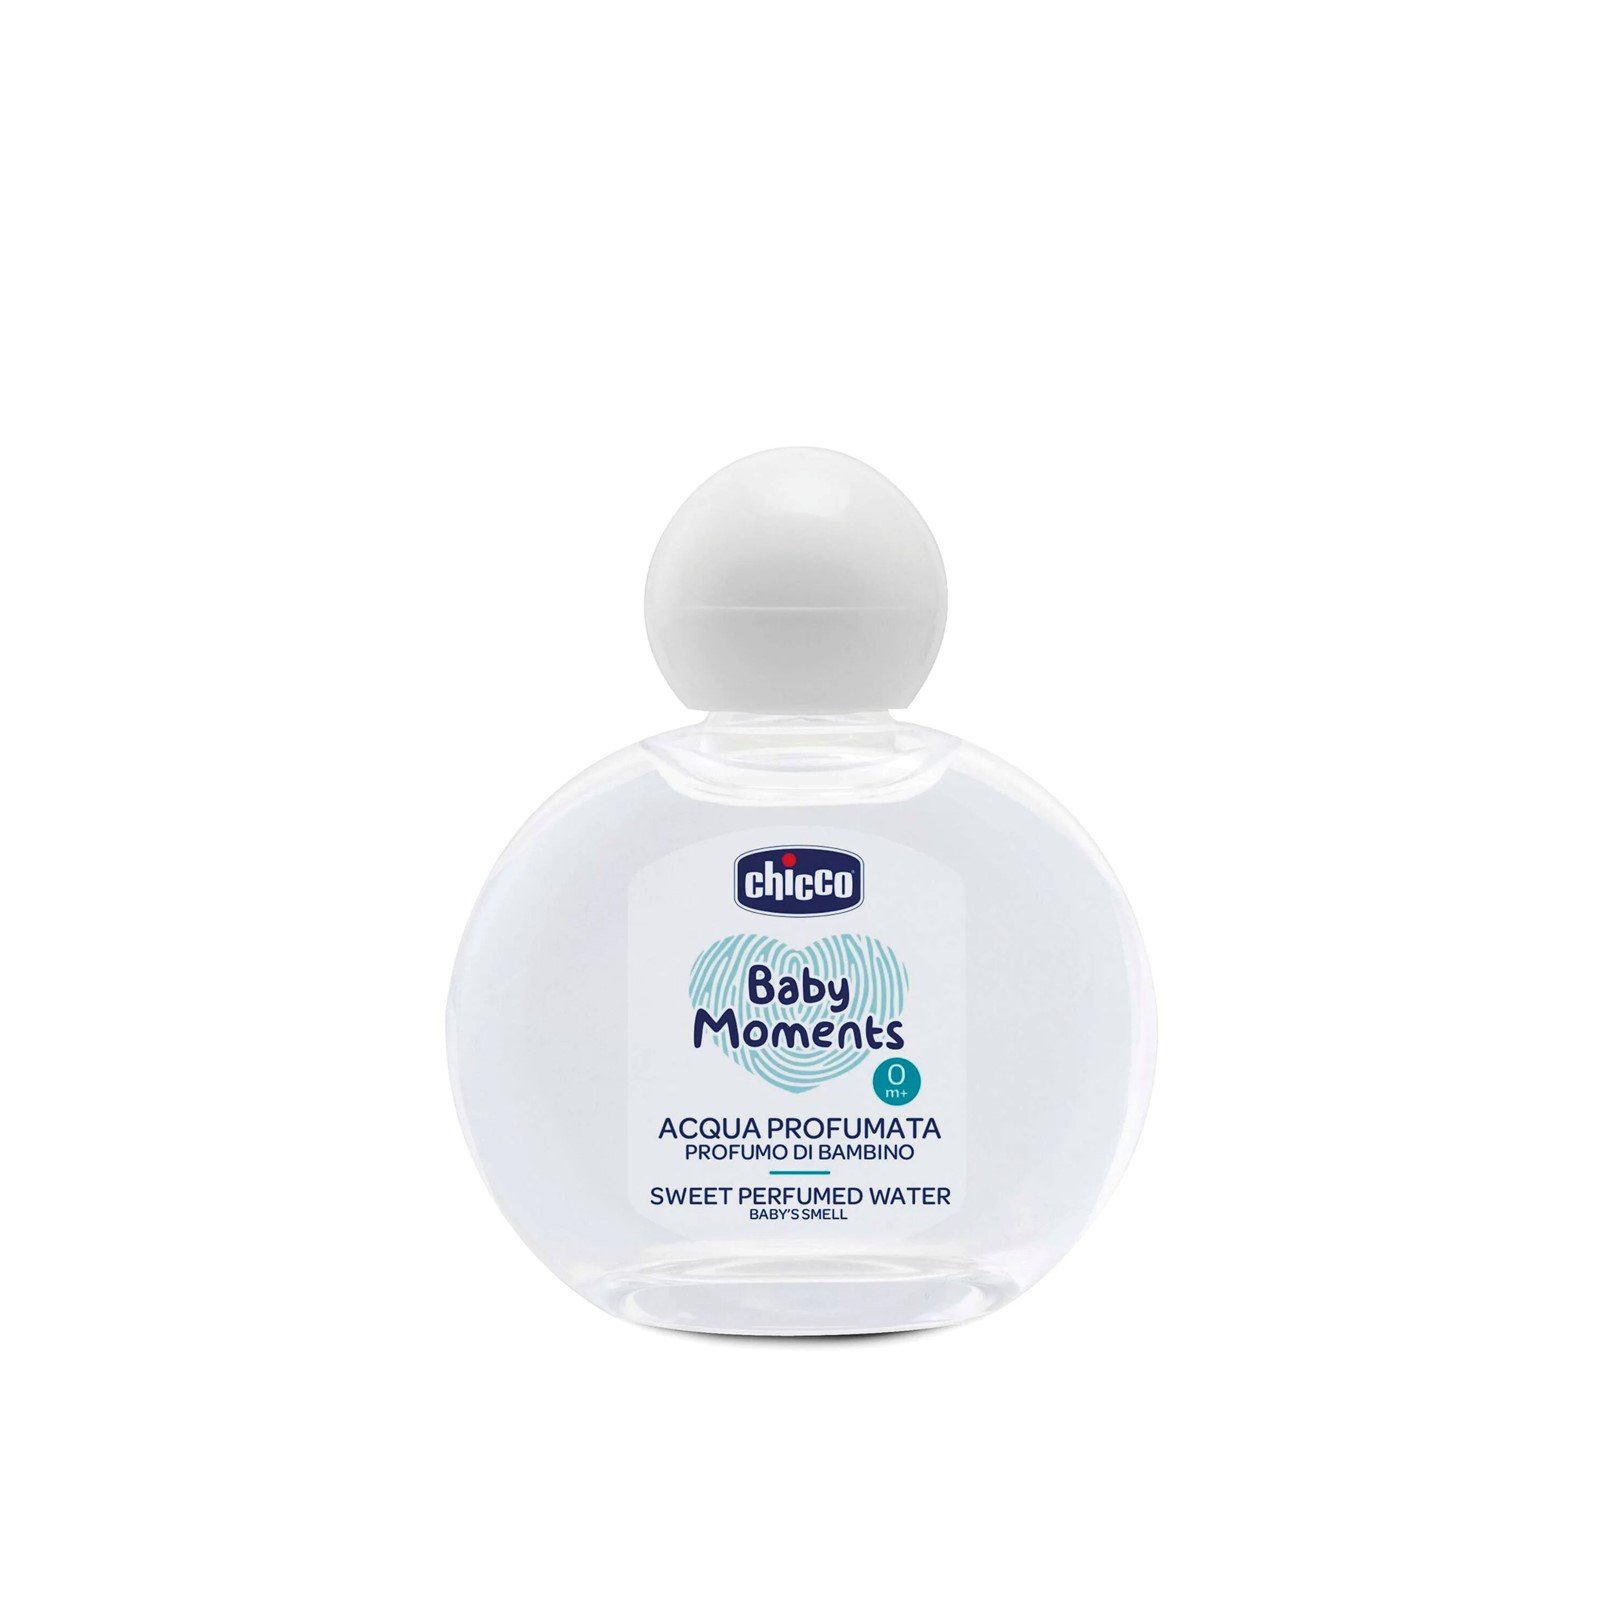 Chicco Baby Moments Sweet Perfumed Water 0m+ 100ml (3.38 fl oz)